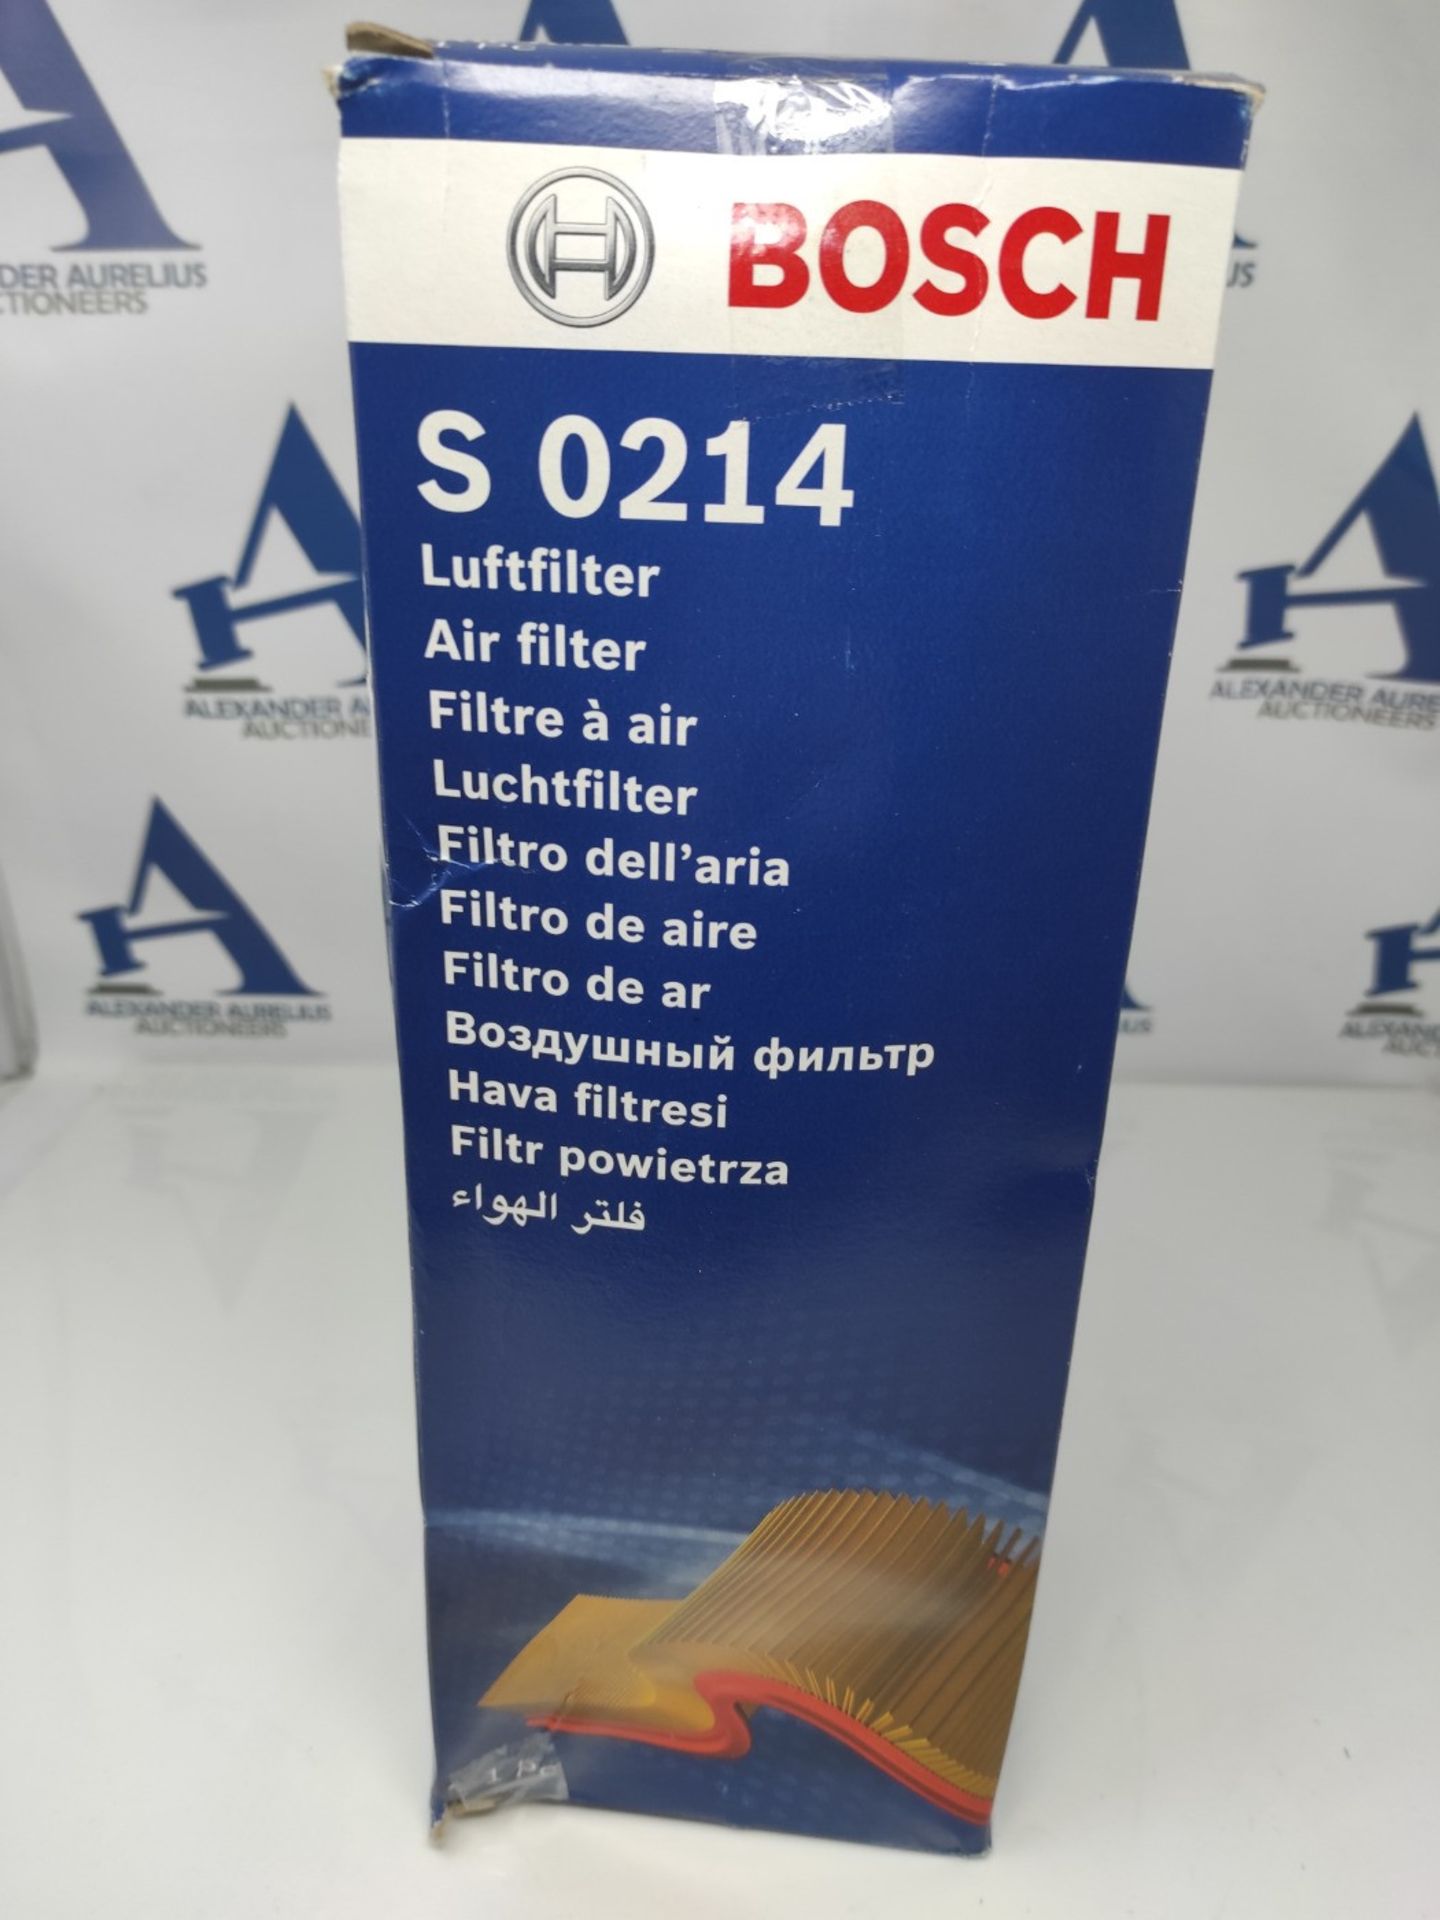 Bosch S0214 Air Filter for Vehicles. - Image 2 of 3